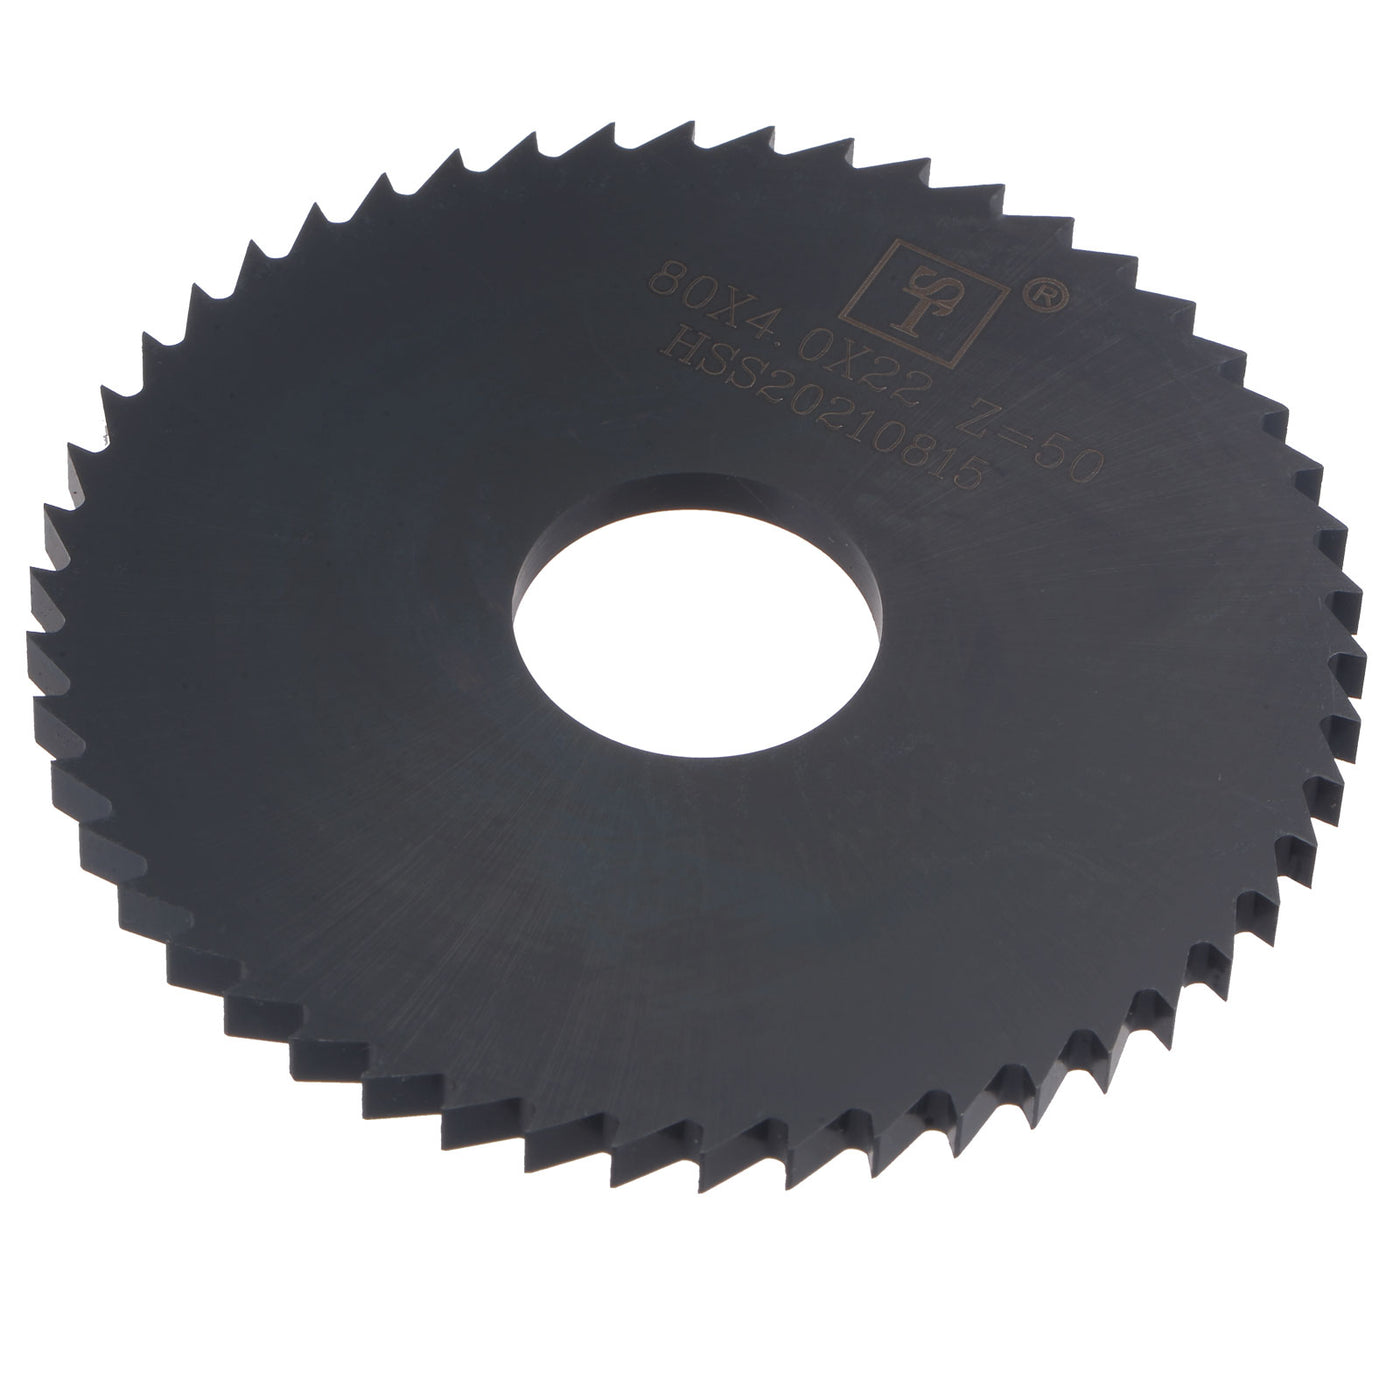 uxcell Uxcell 80mm Dia 22mm Arbor 4mm Thick 50 Tooth Nitriding Circular Saw Blade Cutter